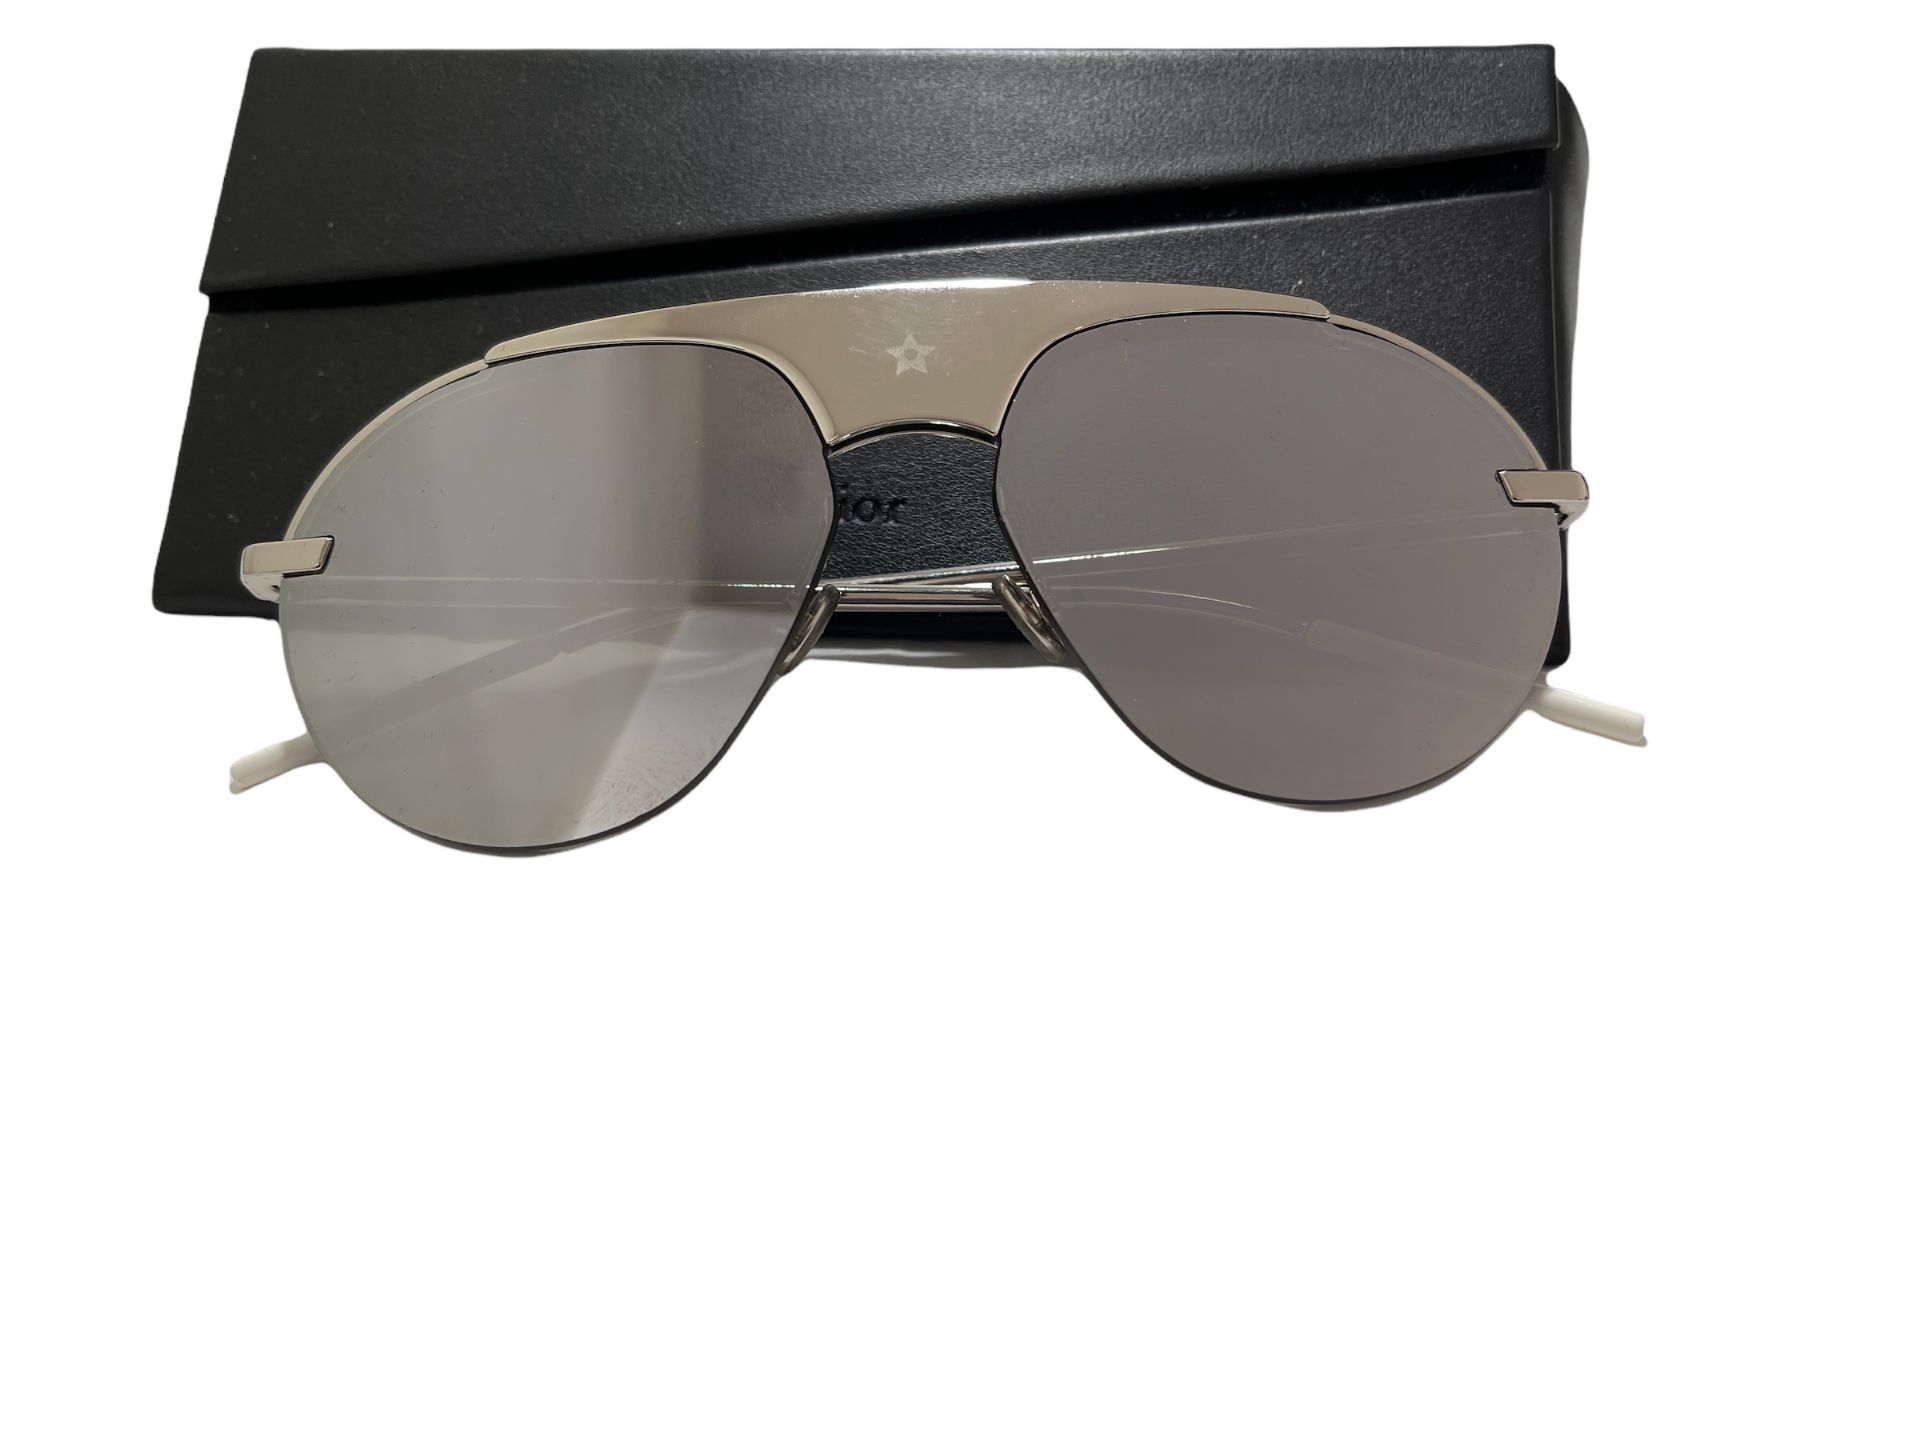 Dior Revolution Sunglasses 0100T Palladium/White 99mm - Surplus Stock from Our Private Jet Charter.. - Image 2 of 11